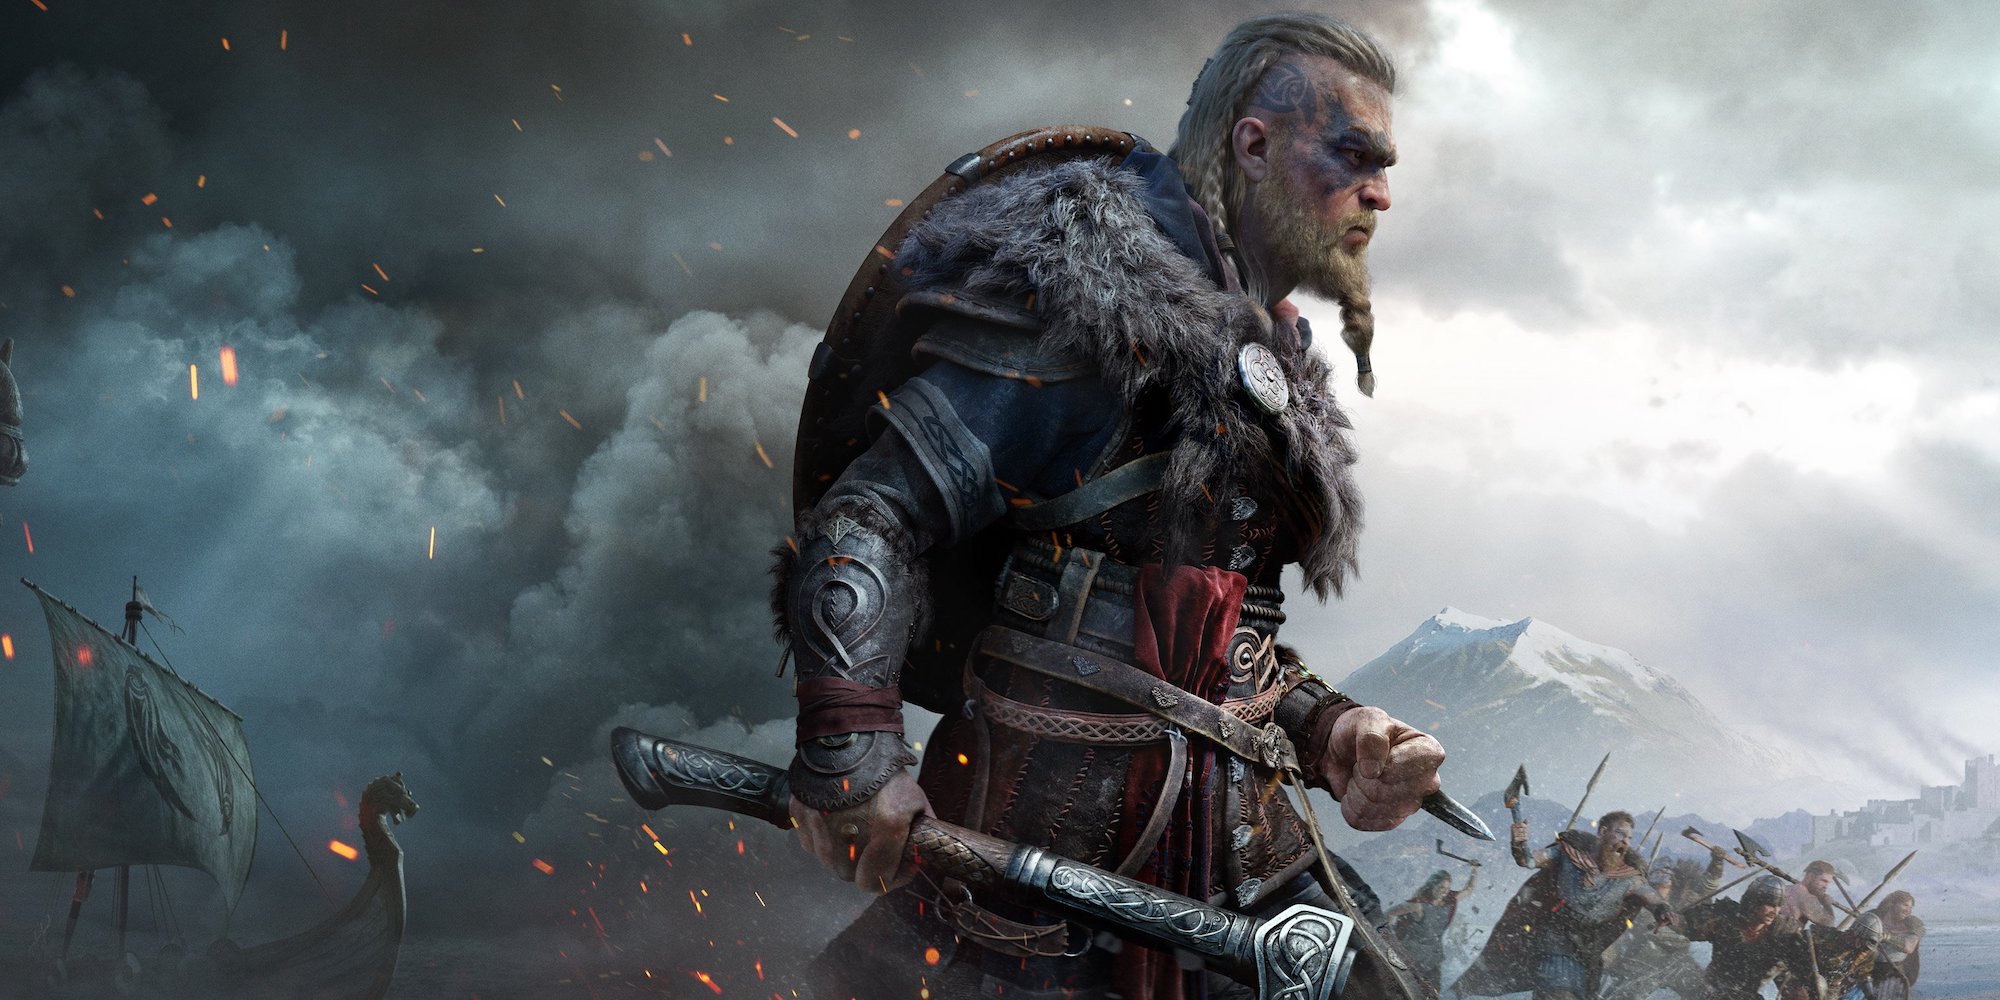 Assassin's Creed Valhalla' review: A Viking epic with new brilliance